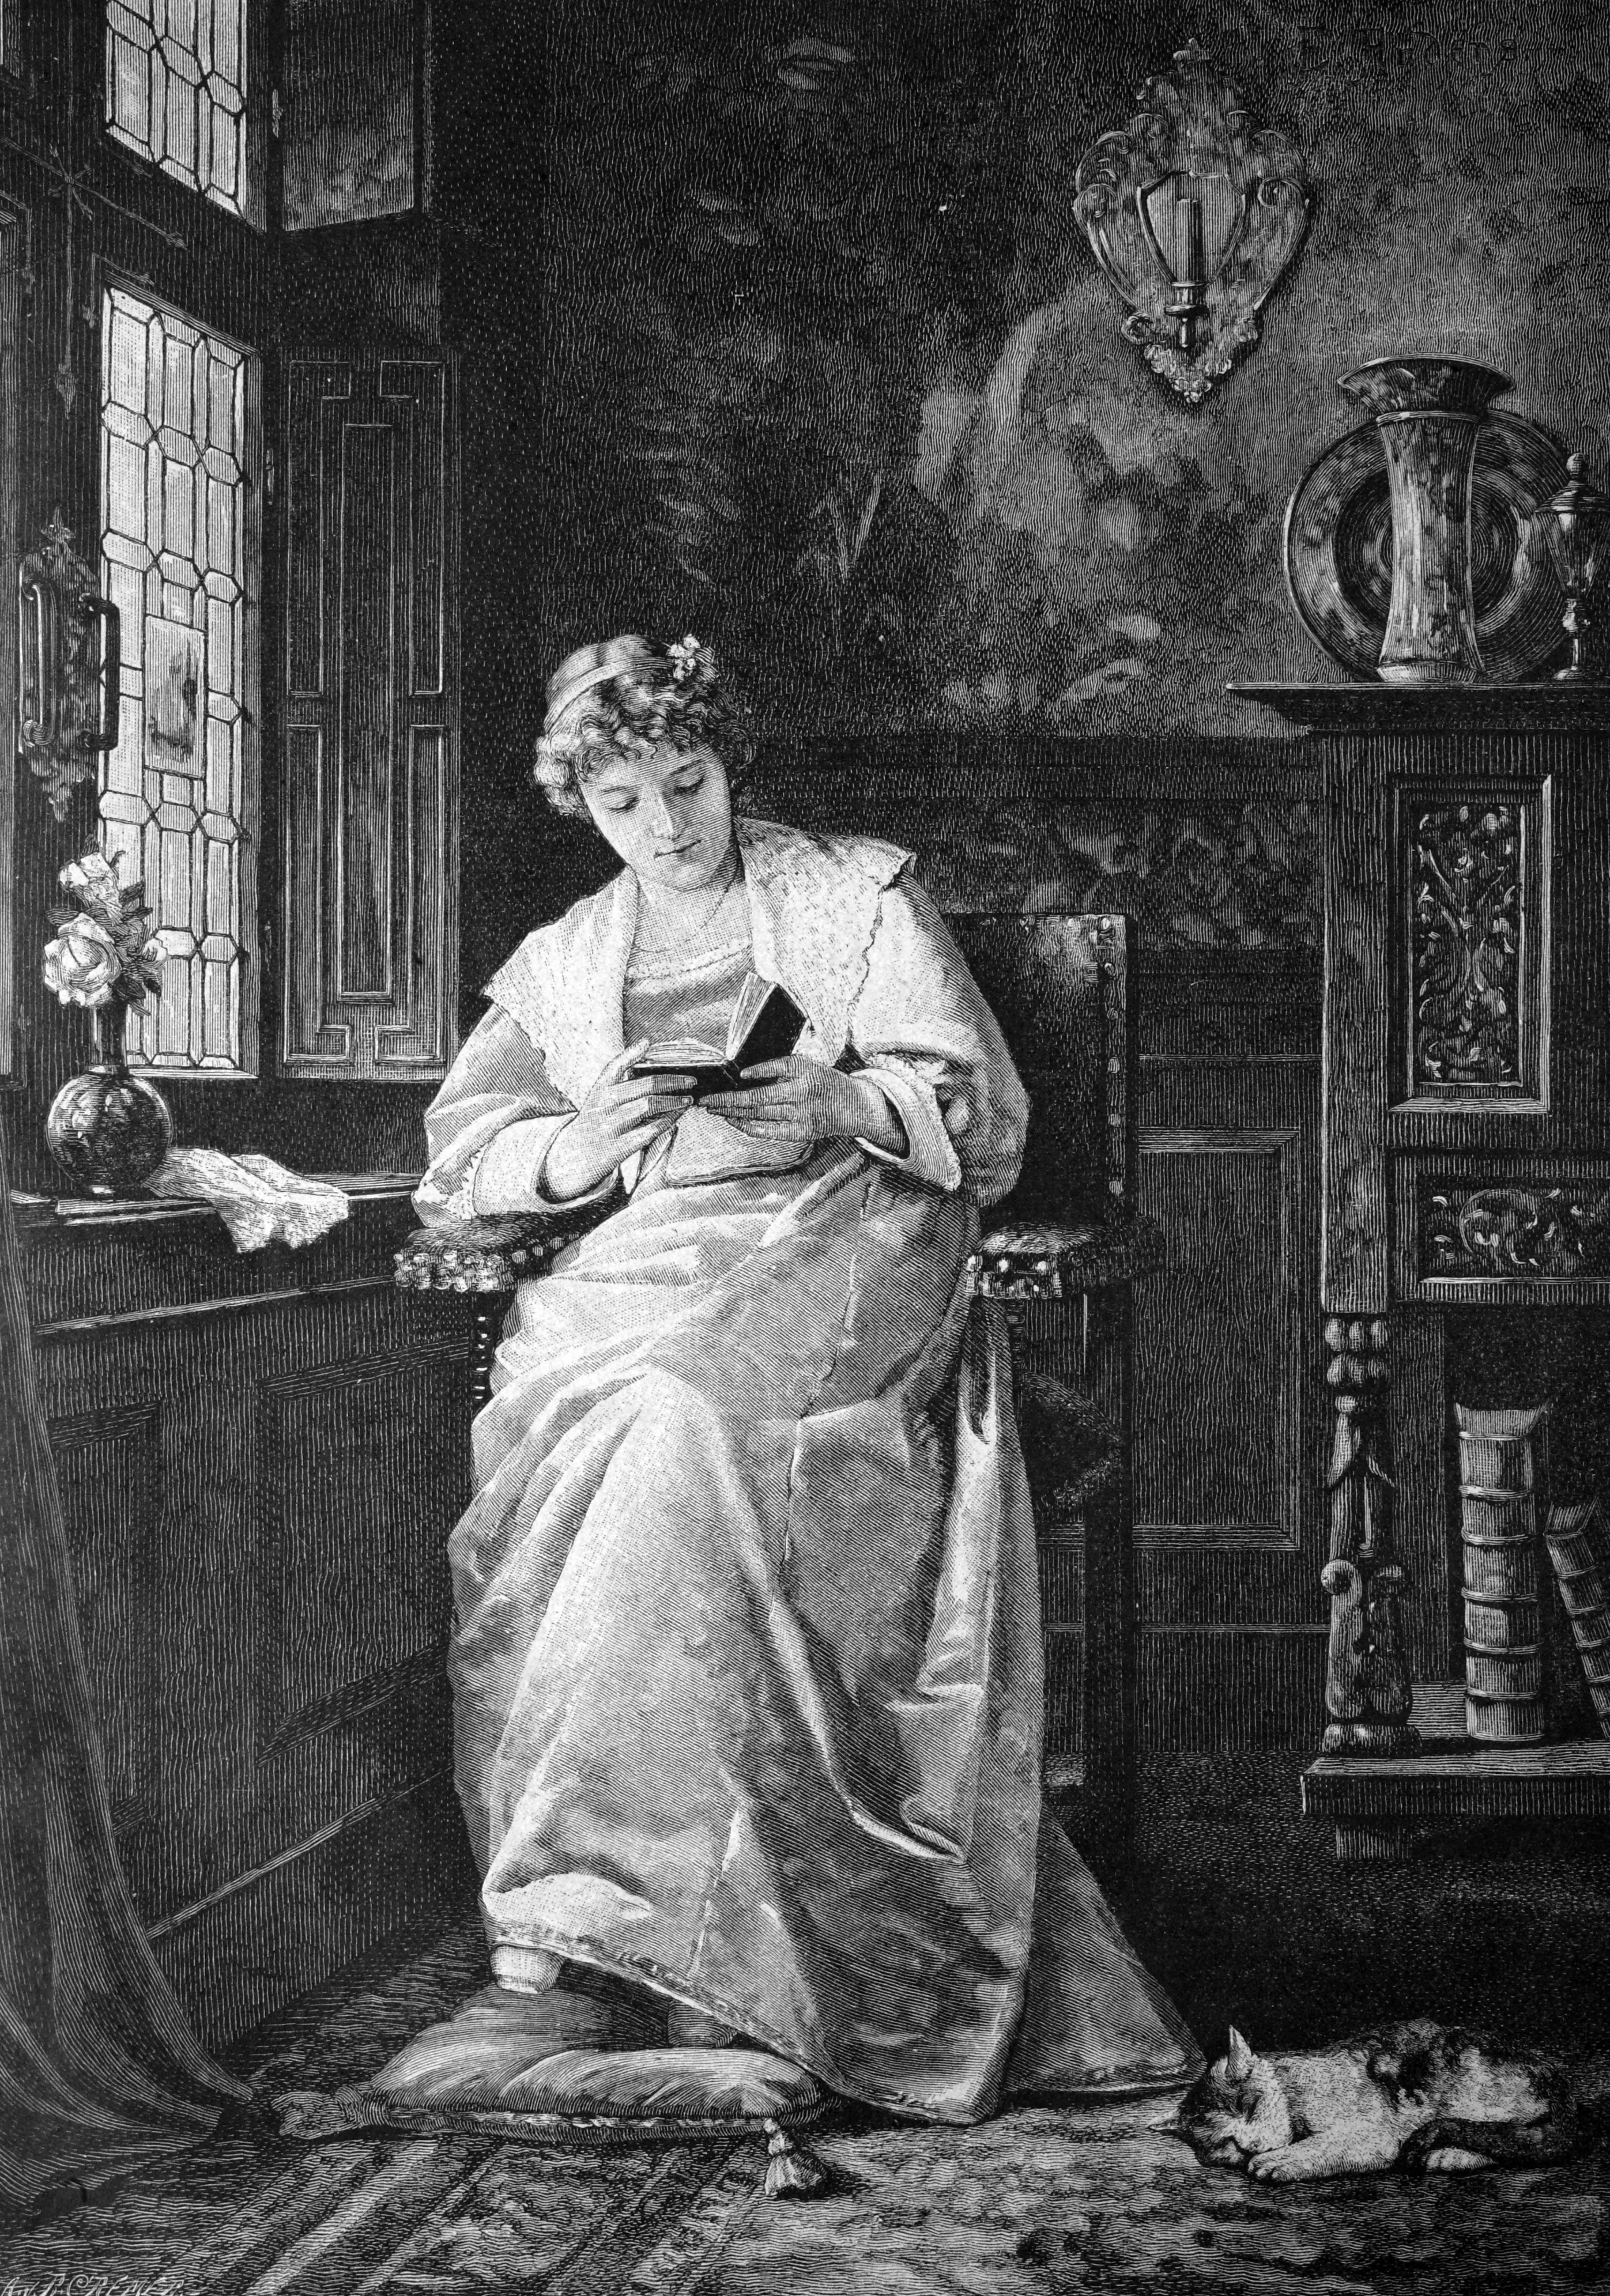 19th century sketch of a woman reading.